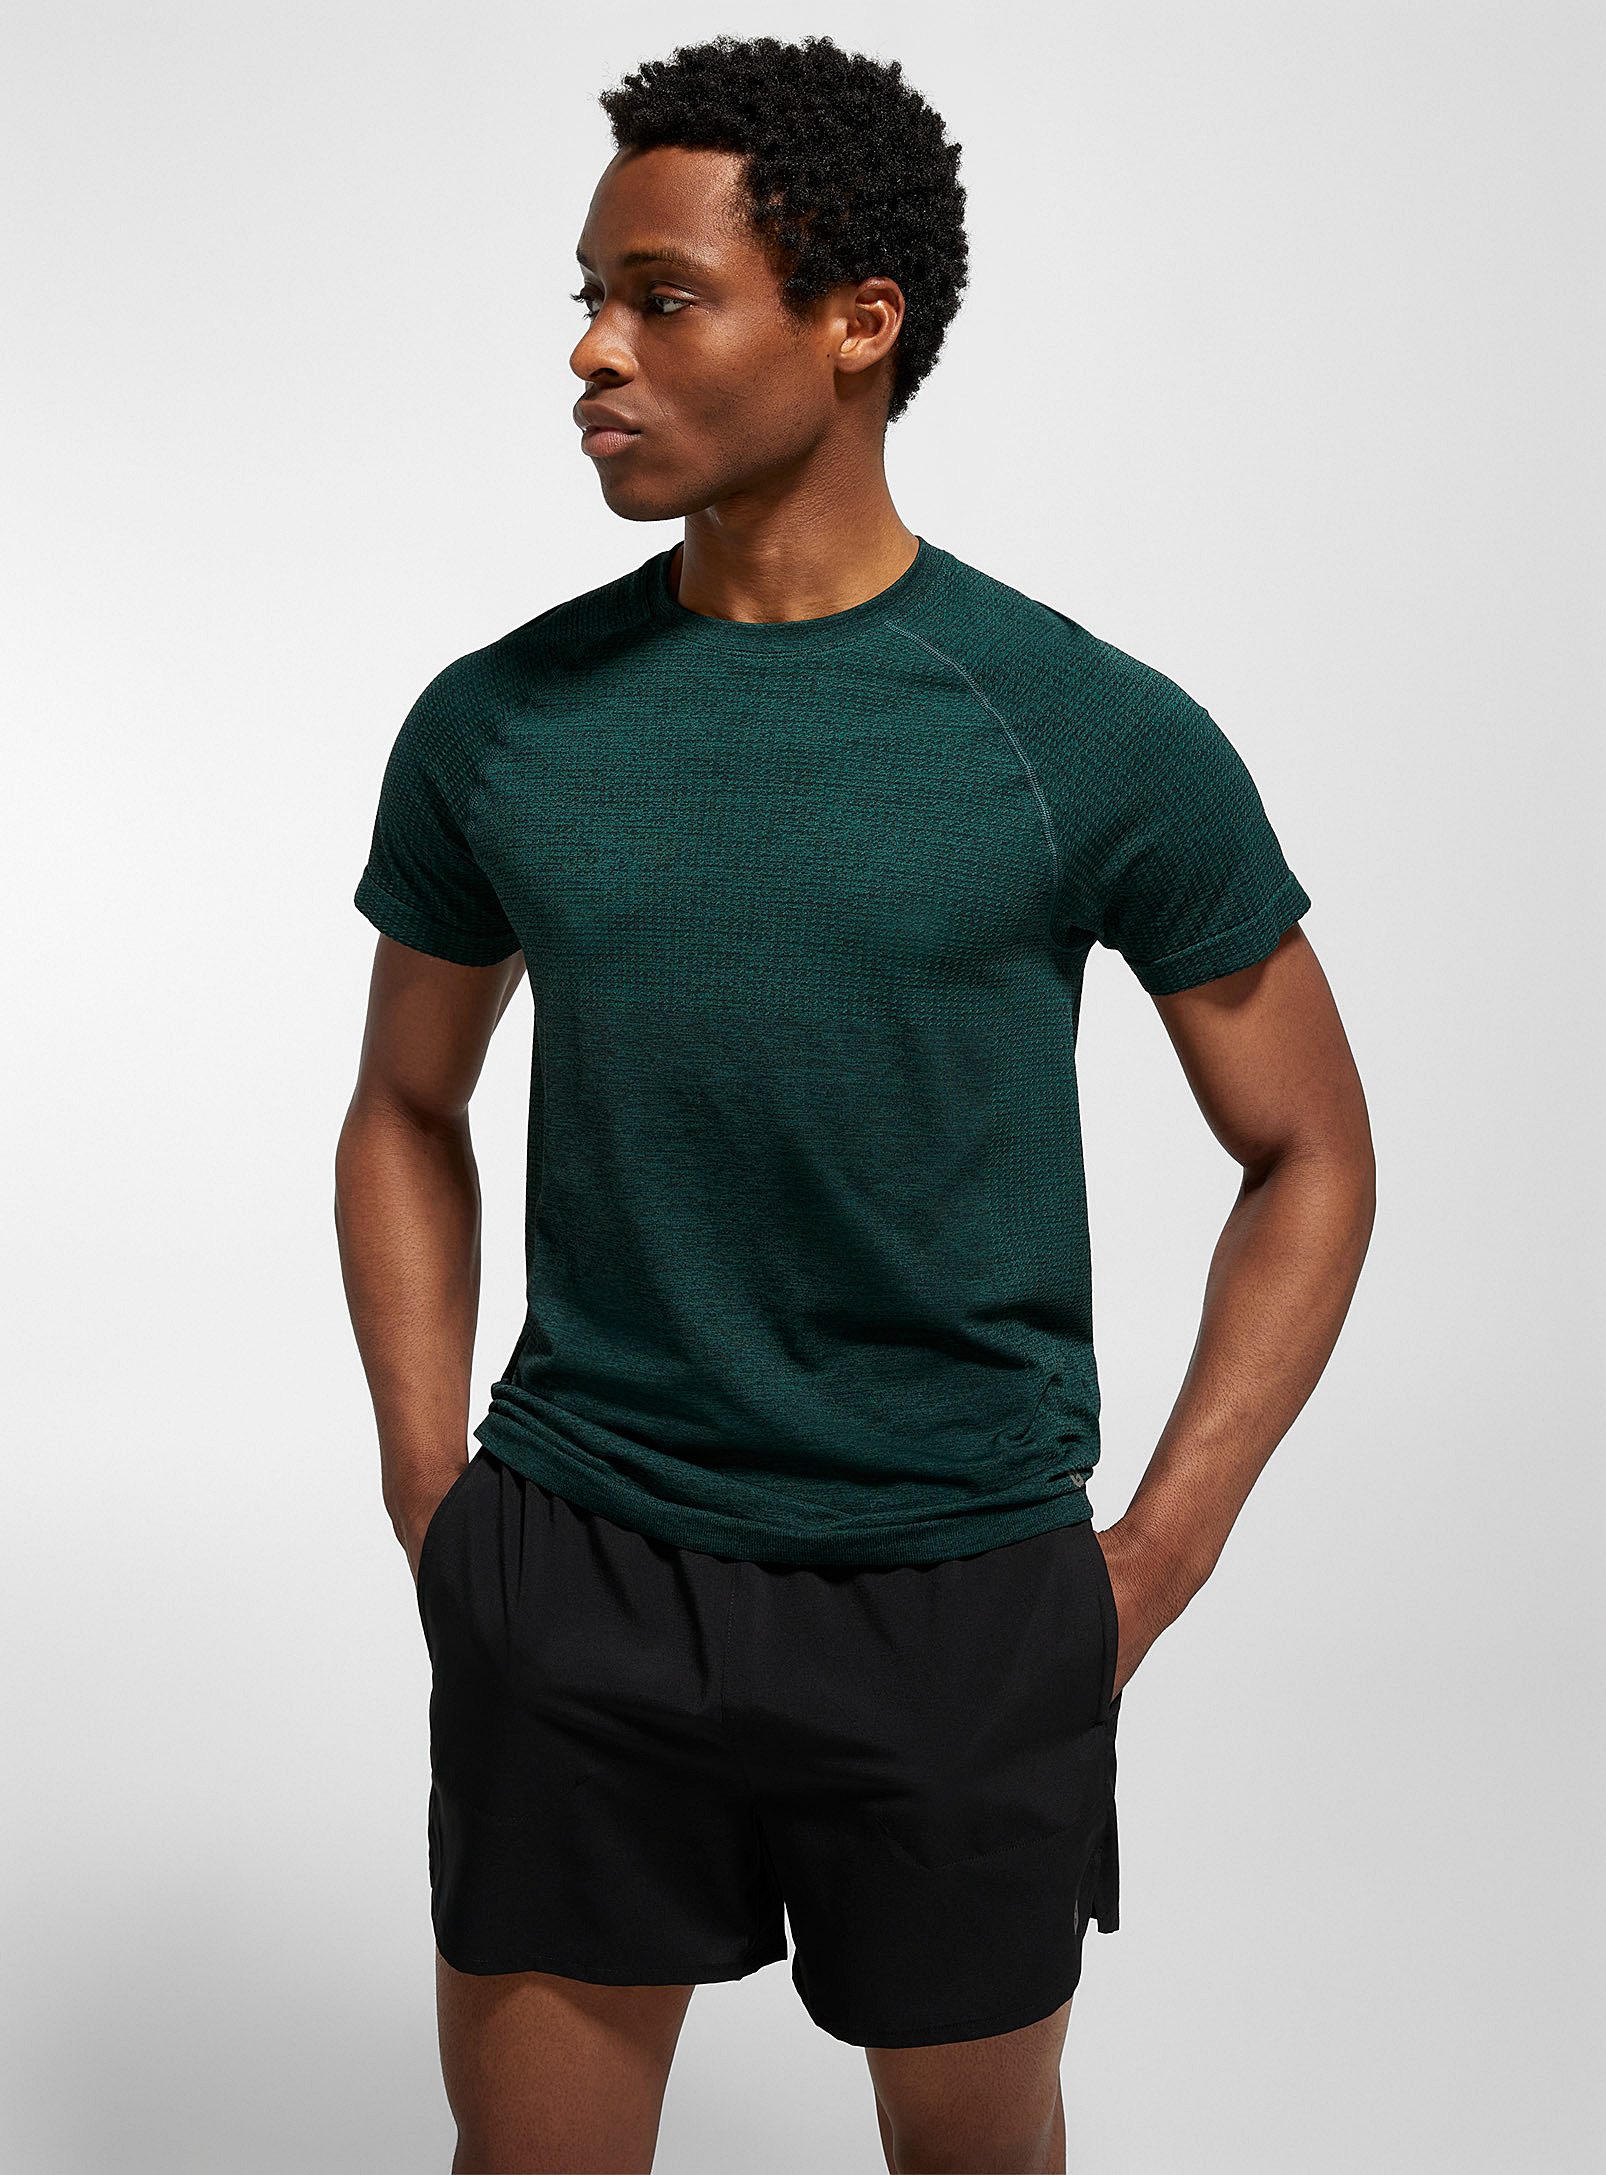 I.fiv5 Perforated Fitted Raglan Tee In Green